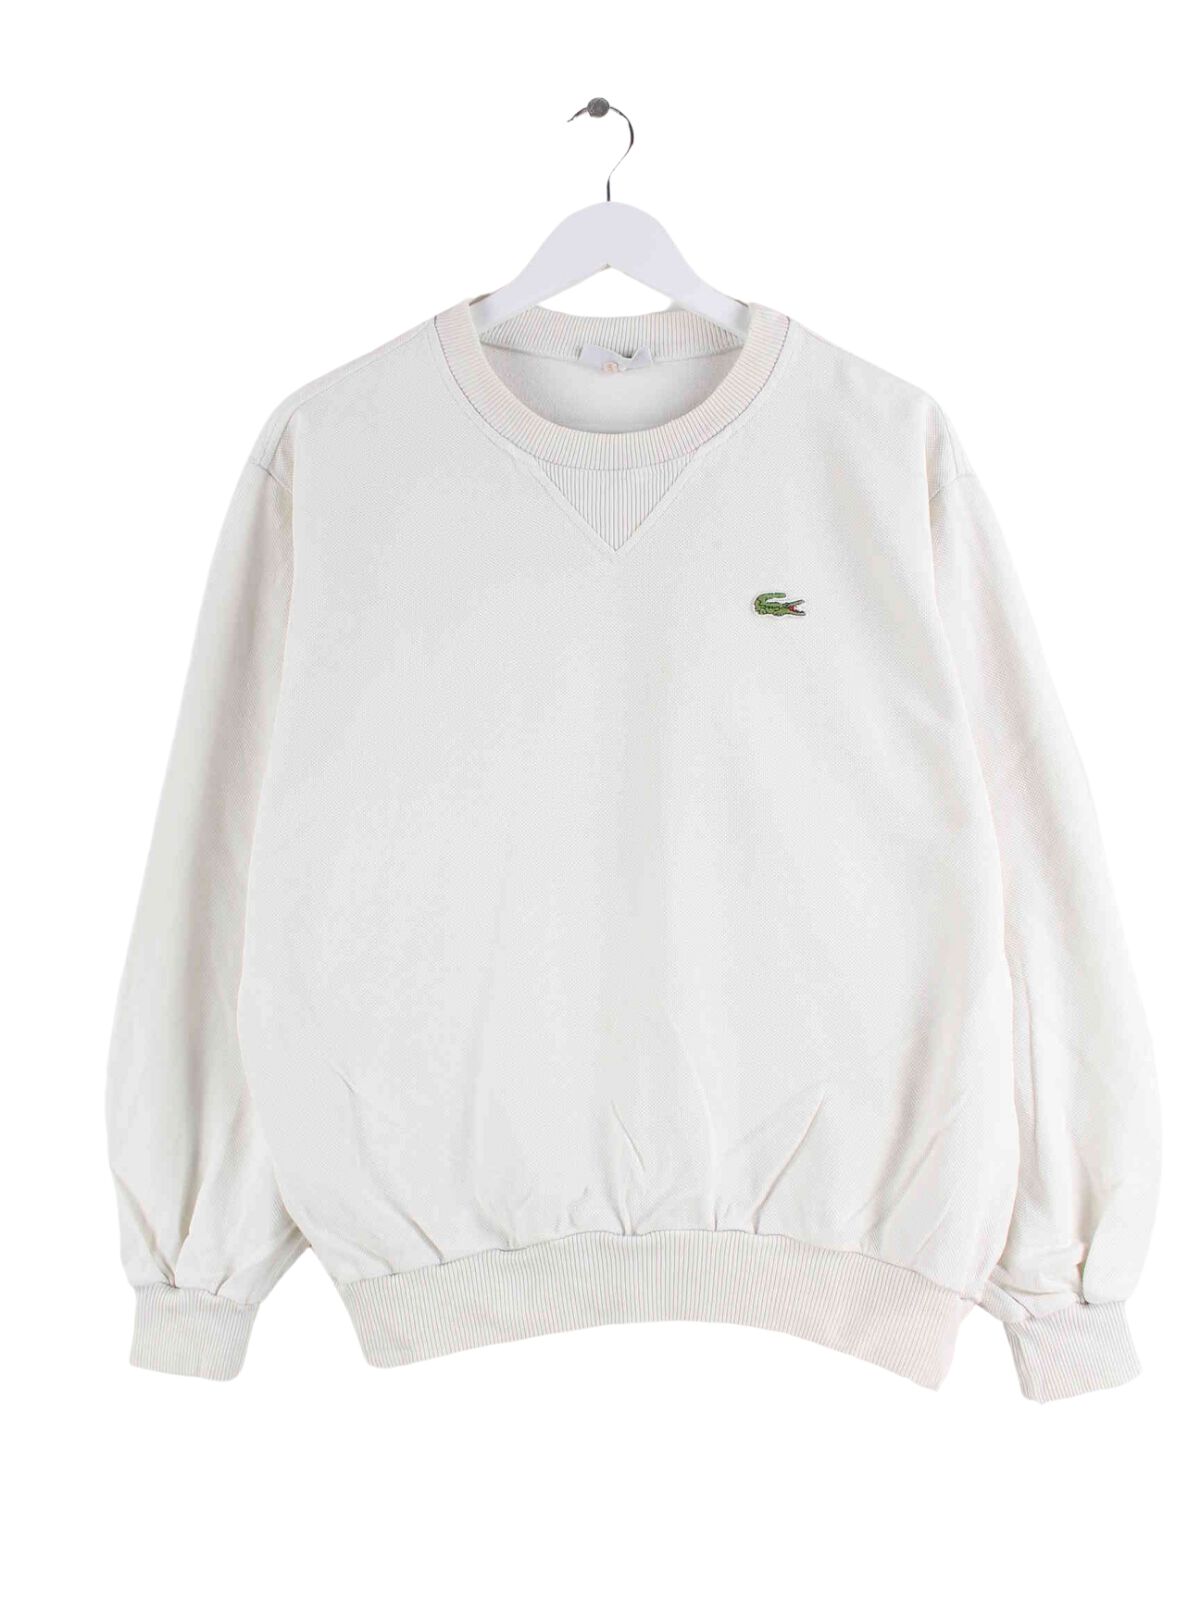 Lacoste 90s Vintage Basic Sweater Beige XS (front image)